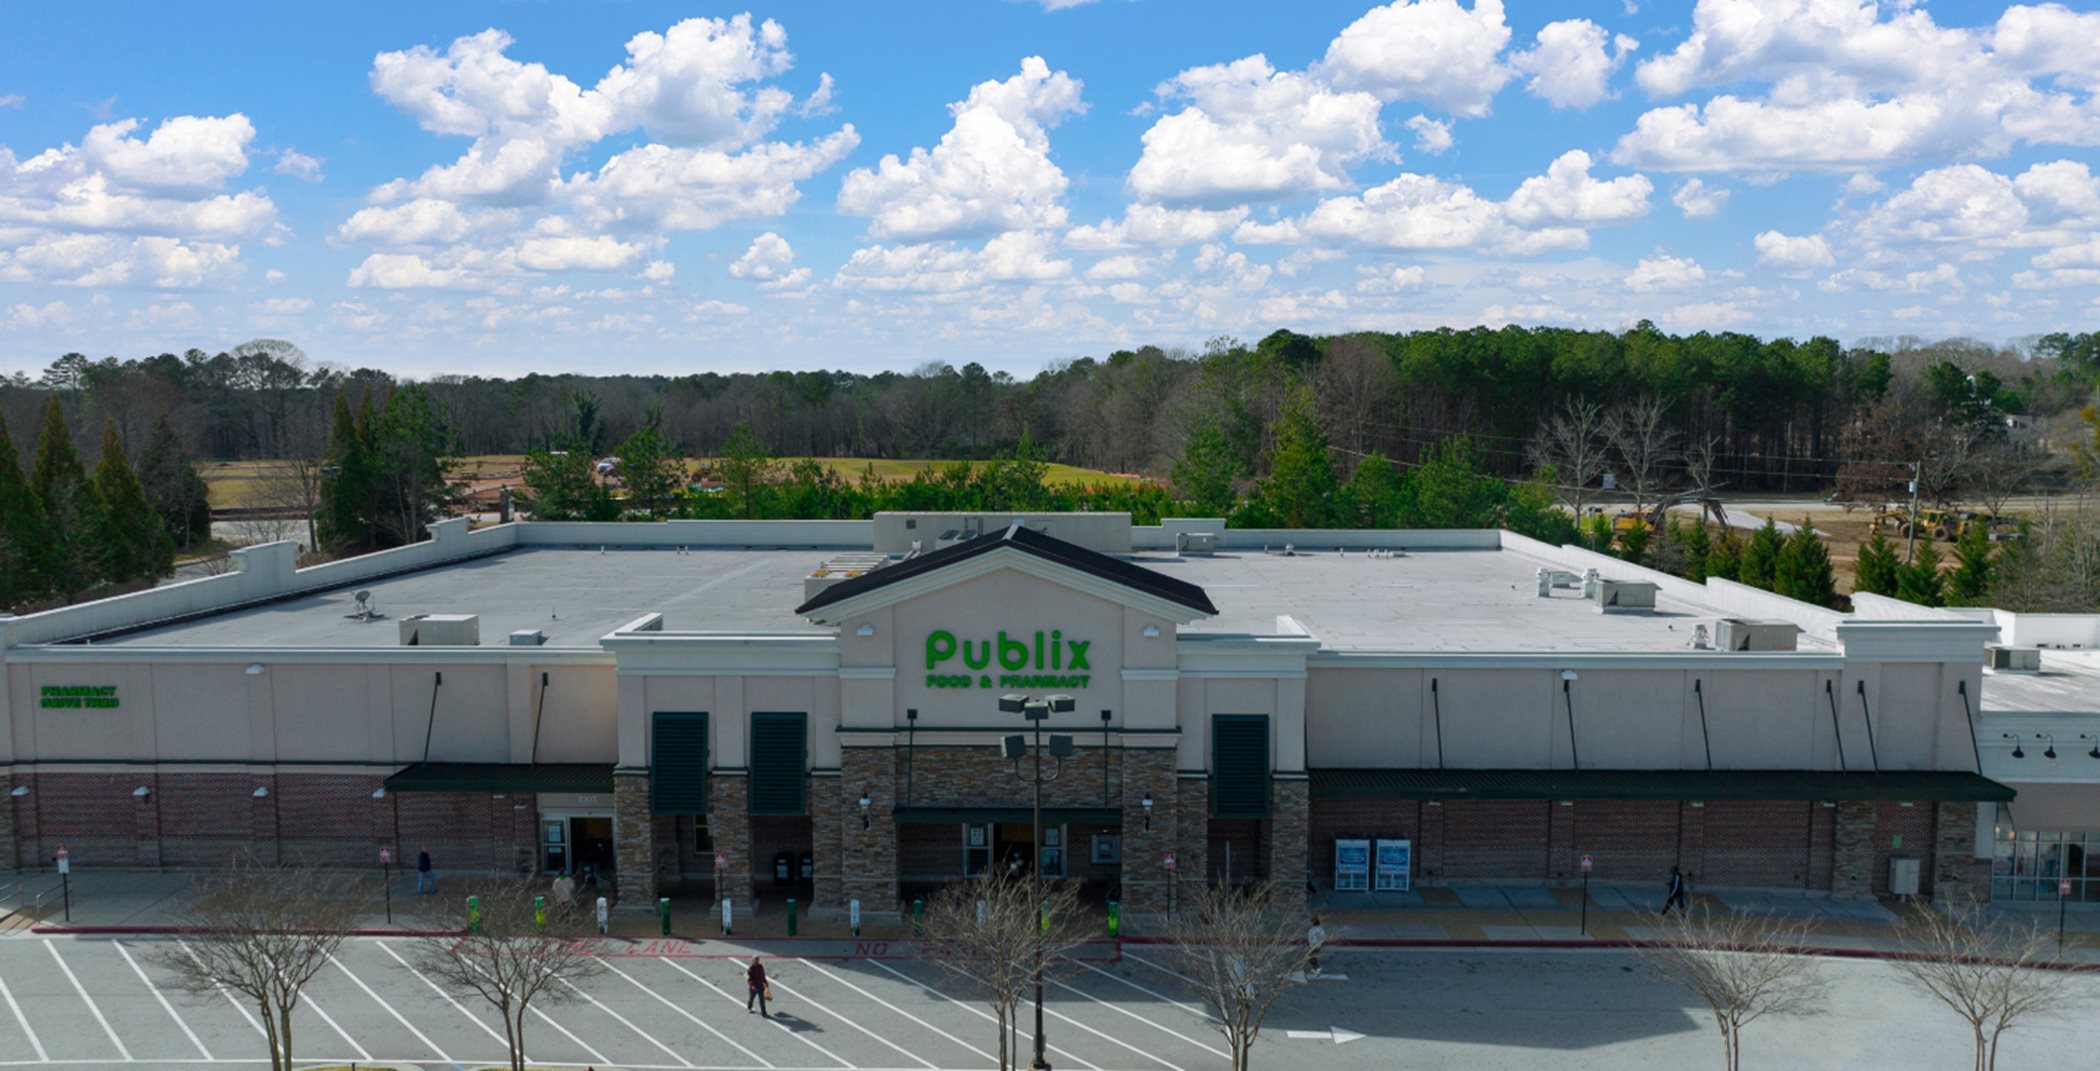 Local Publix at the Market at Cane Bay Shopping Center